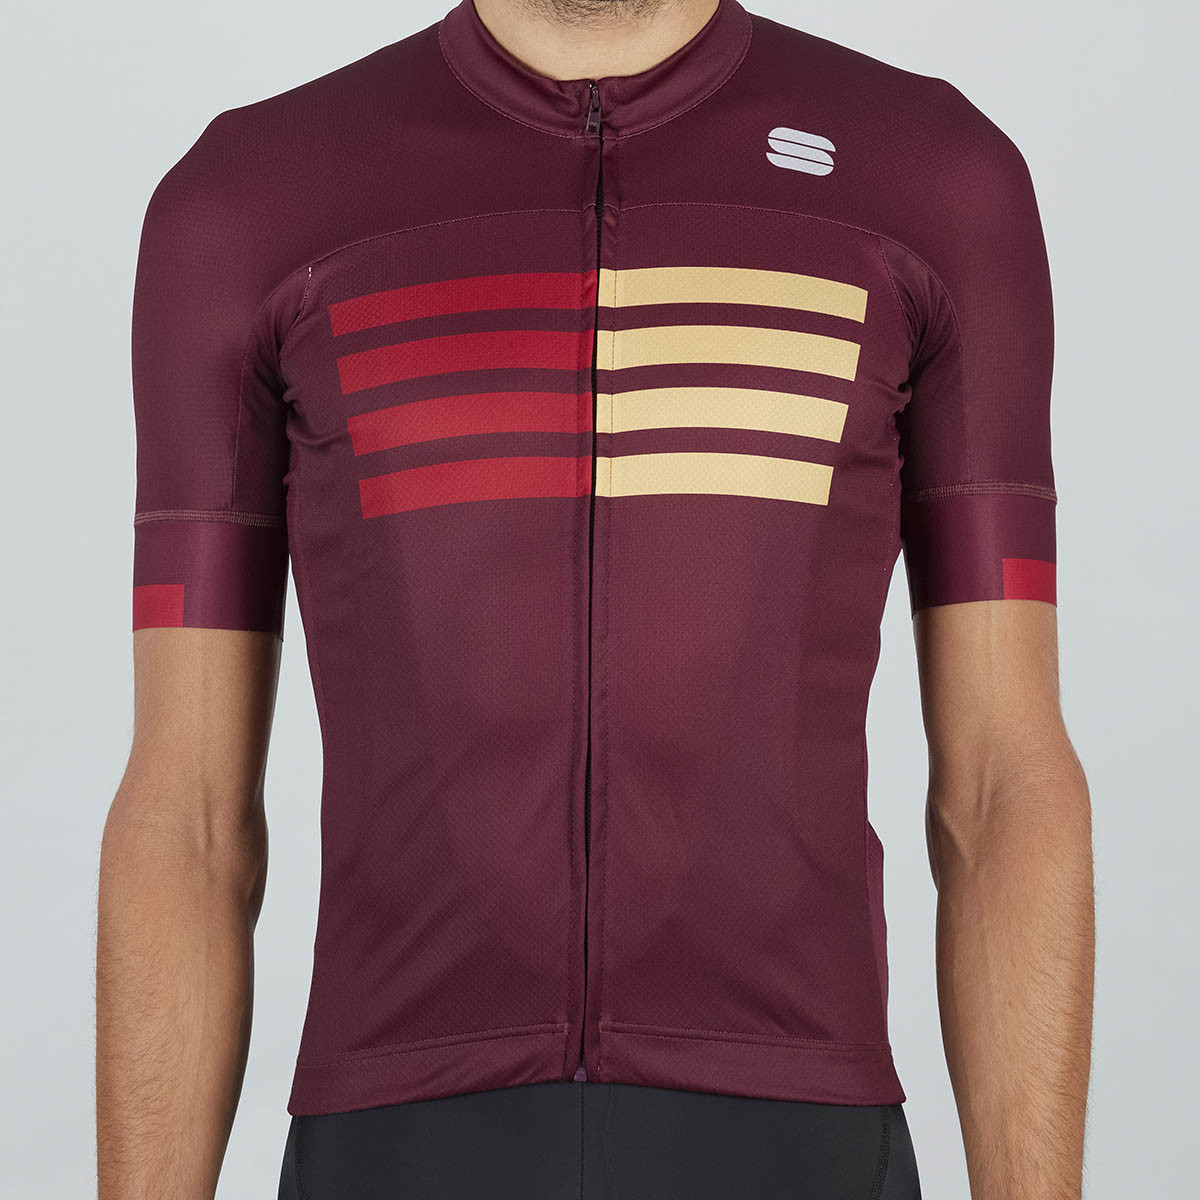 Sportful Wire Jersey - Red Wine Red Rumba Gold